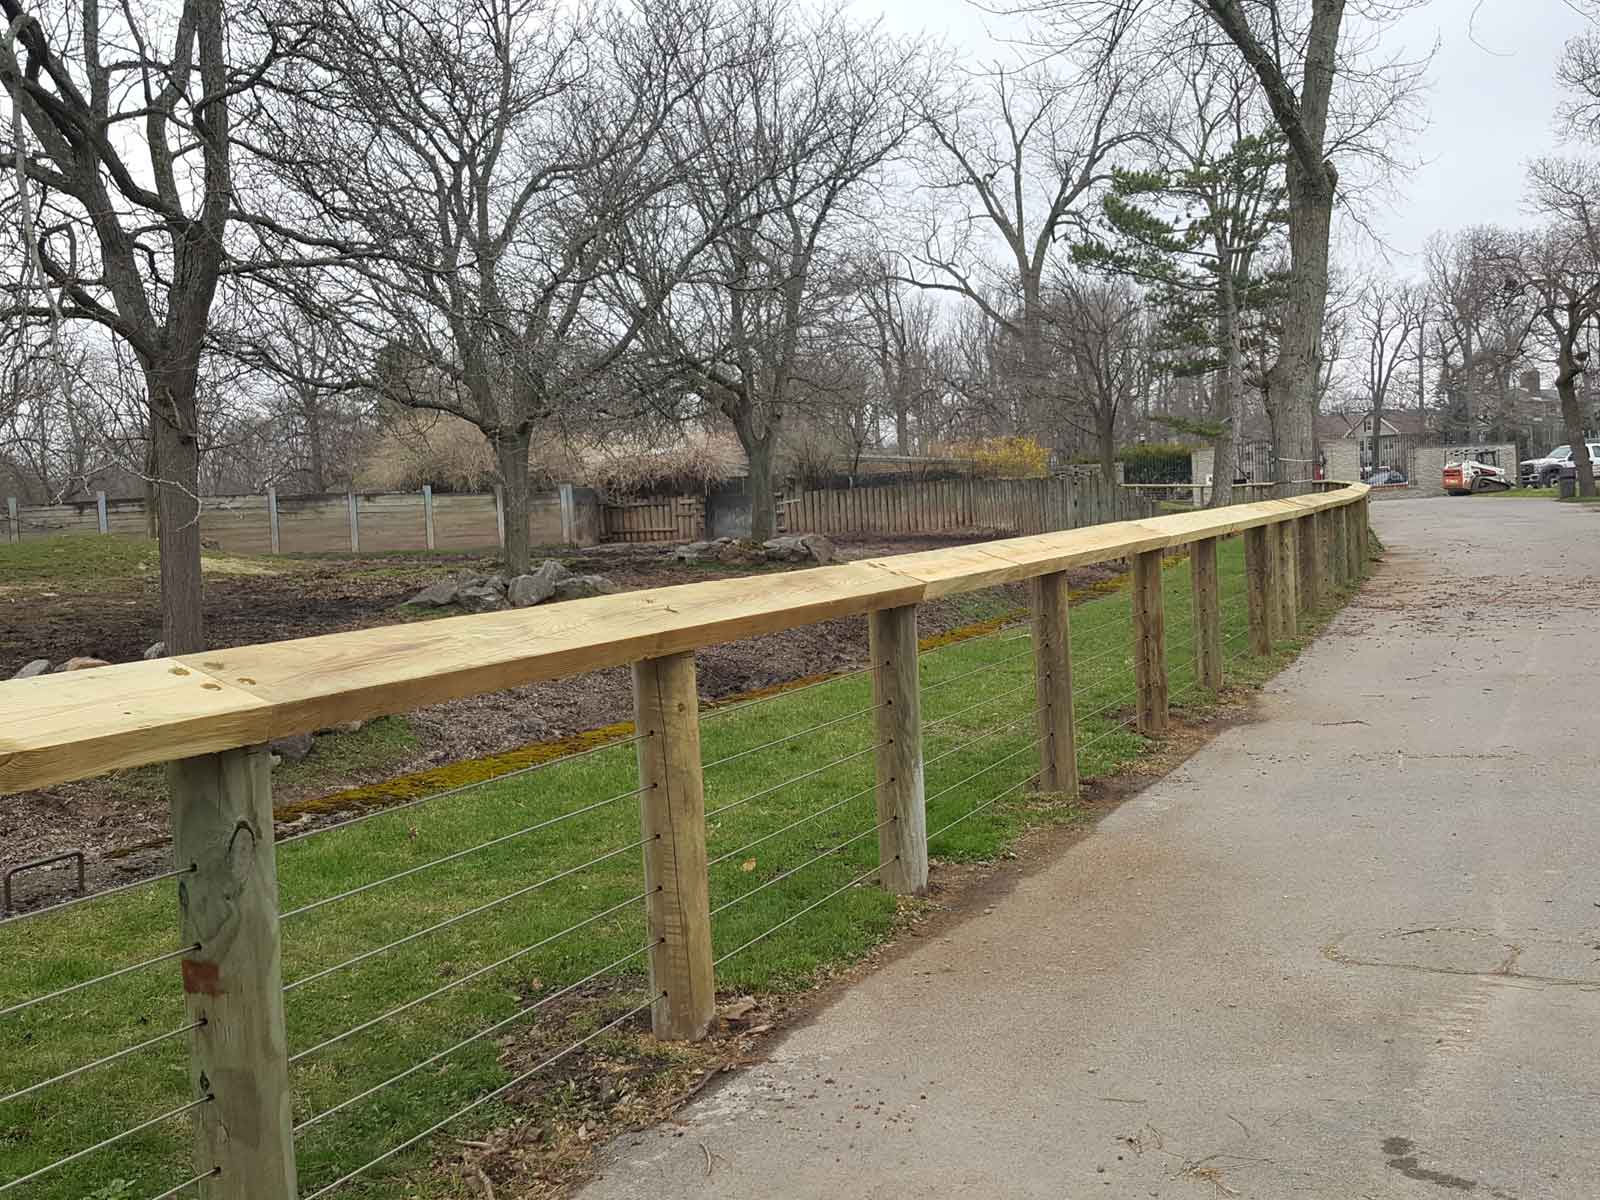 Commercial Fencing for Animal Parks and Zoos in Tonawanda, NY